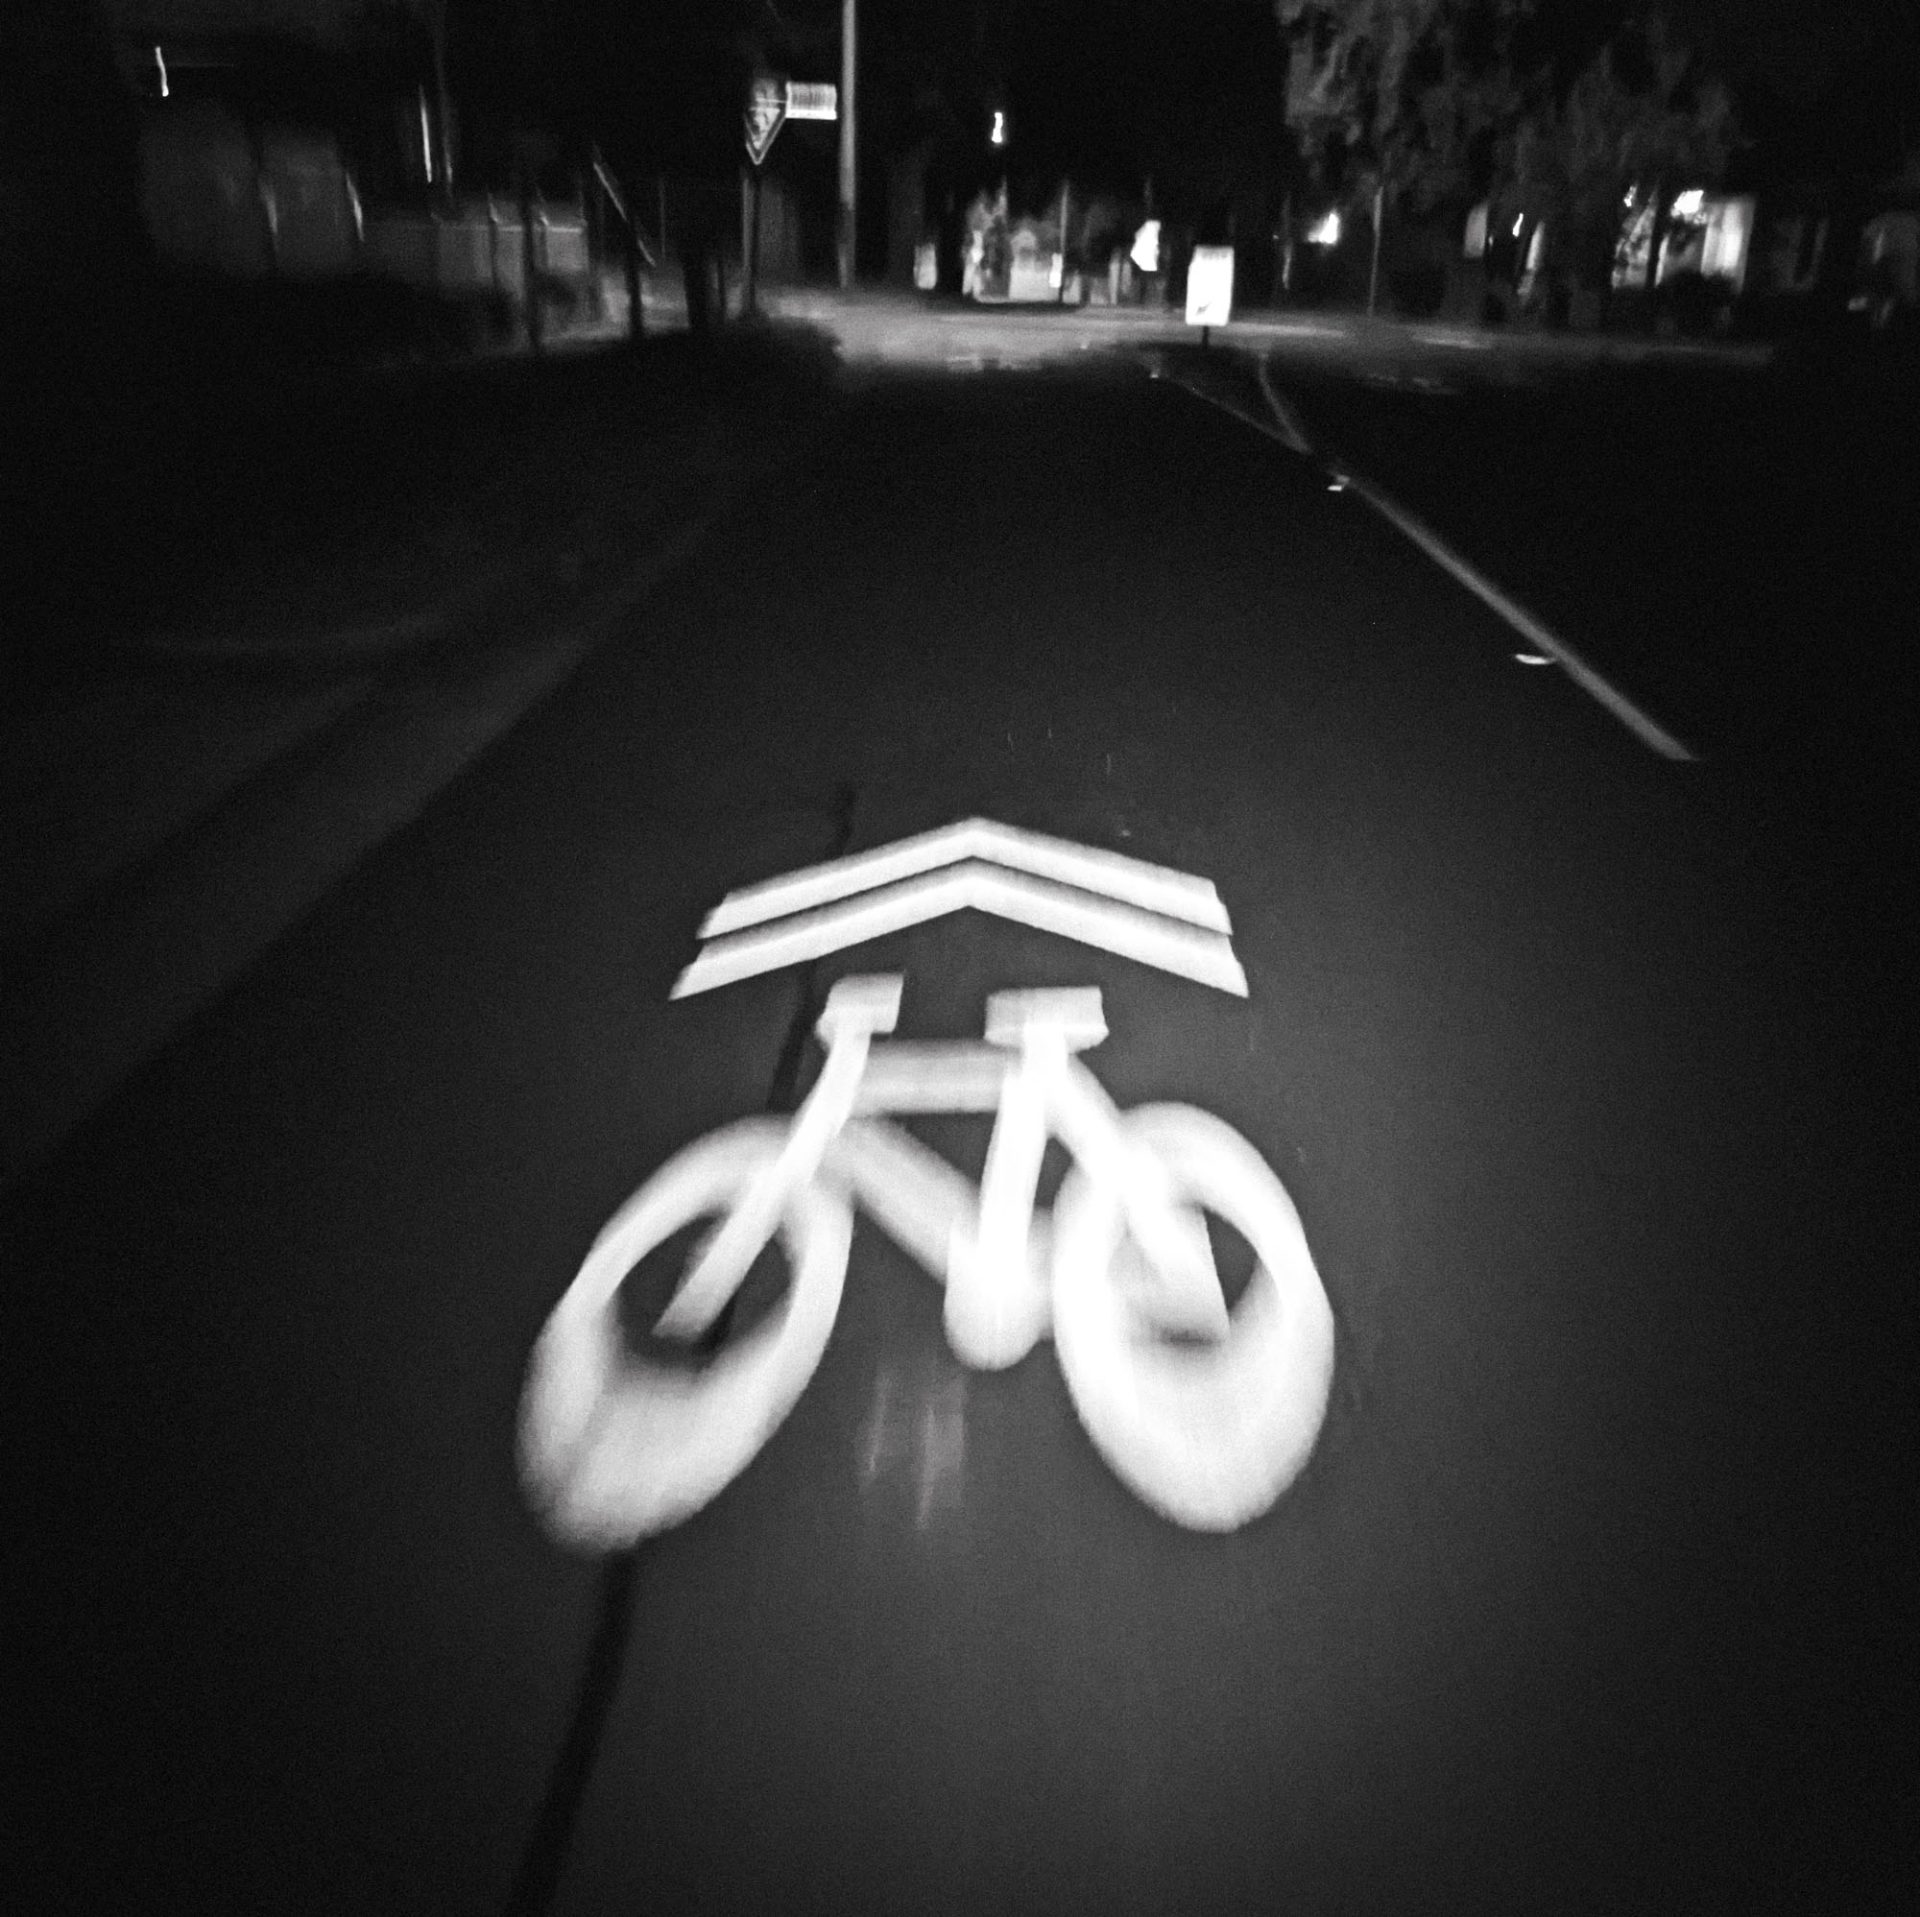 A moody, black-and-white night shot of a bike lane. The "Sharrow" signal of a bike and two arrows is slightly blurred but pops on the blackened pavement. Ahead, an intersection looms.